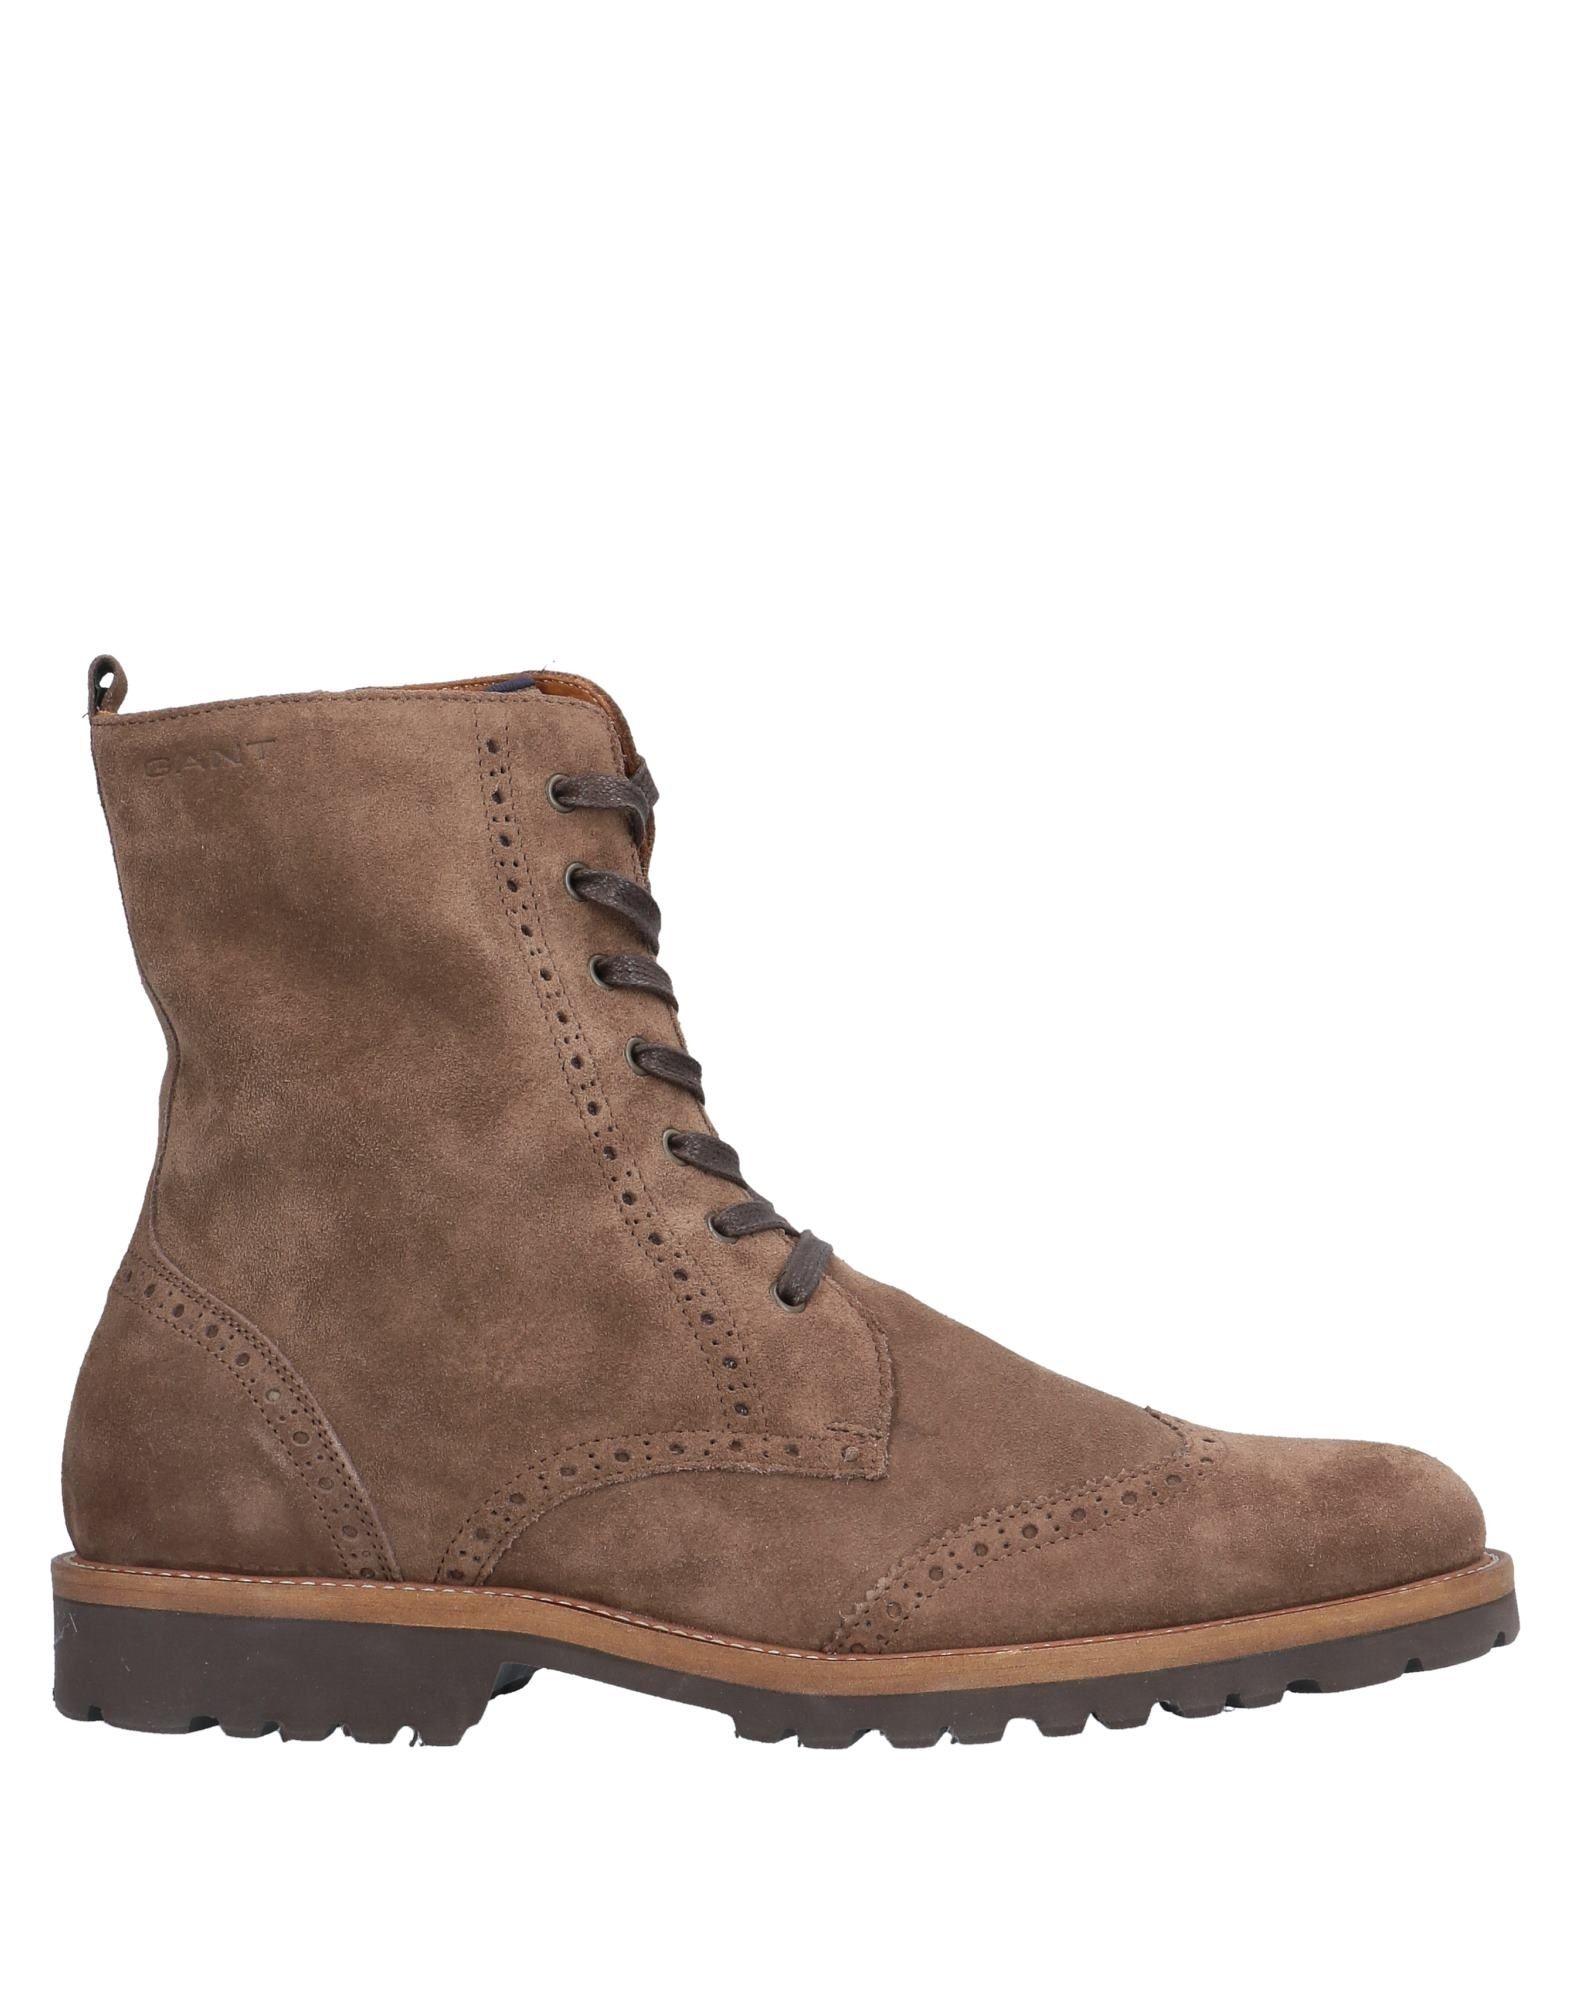 GANT Suede Ankle Boots in Cocoa (Brown) for Men - Lyst